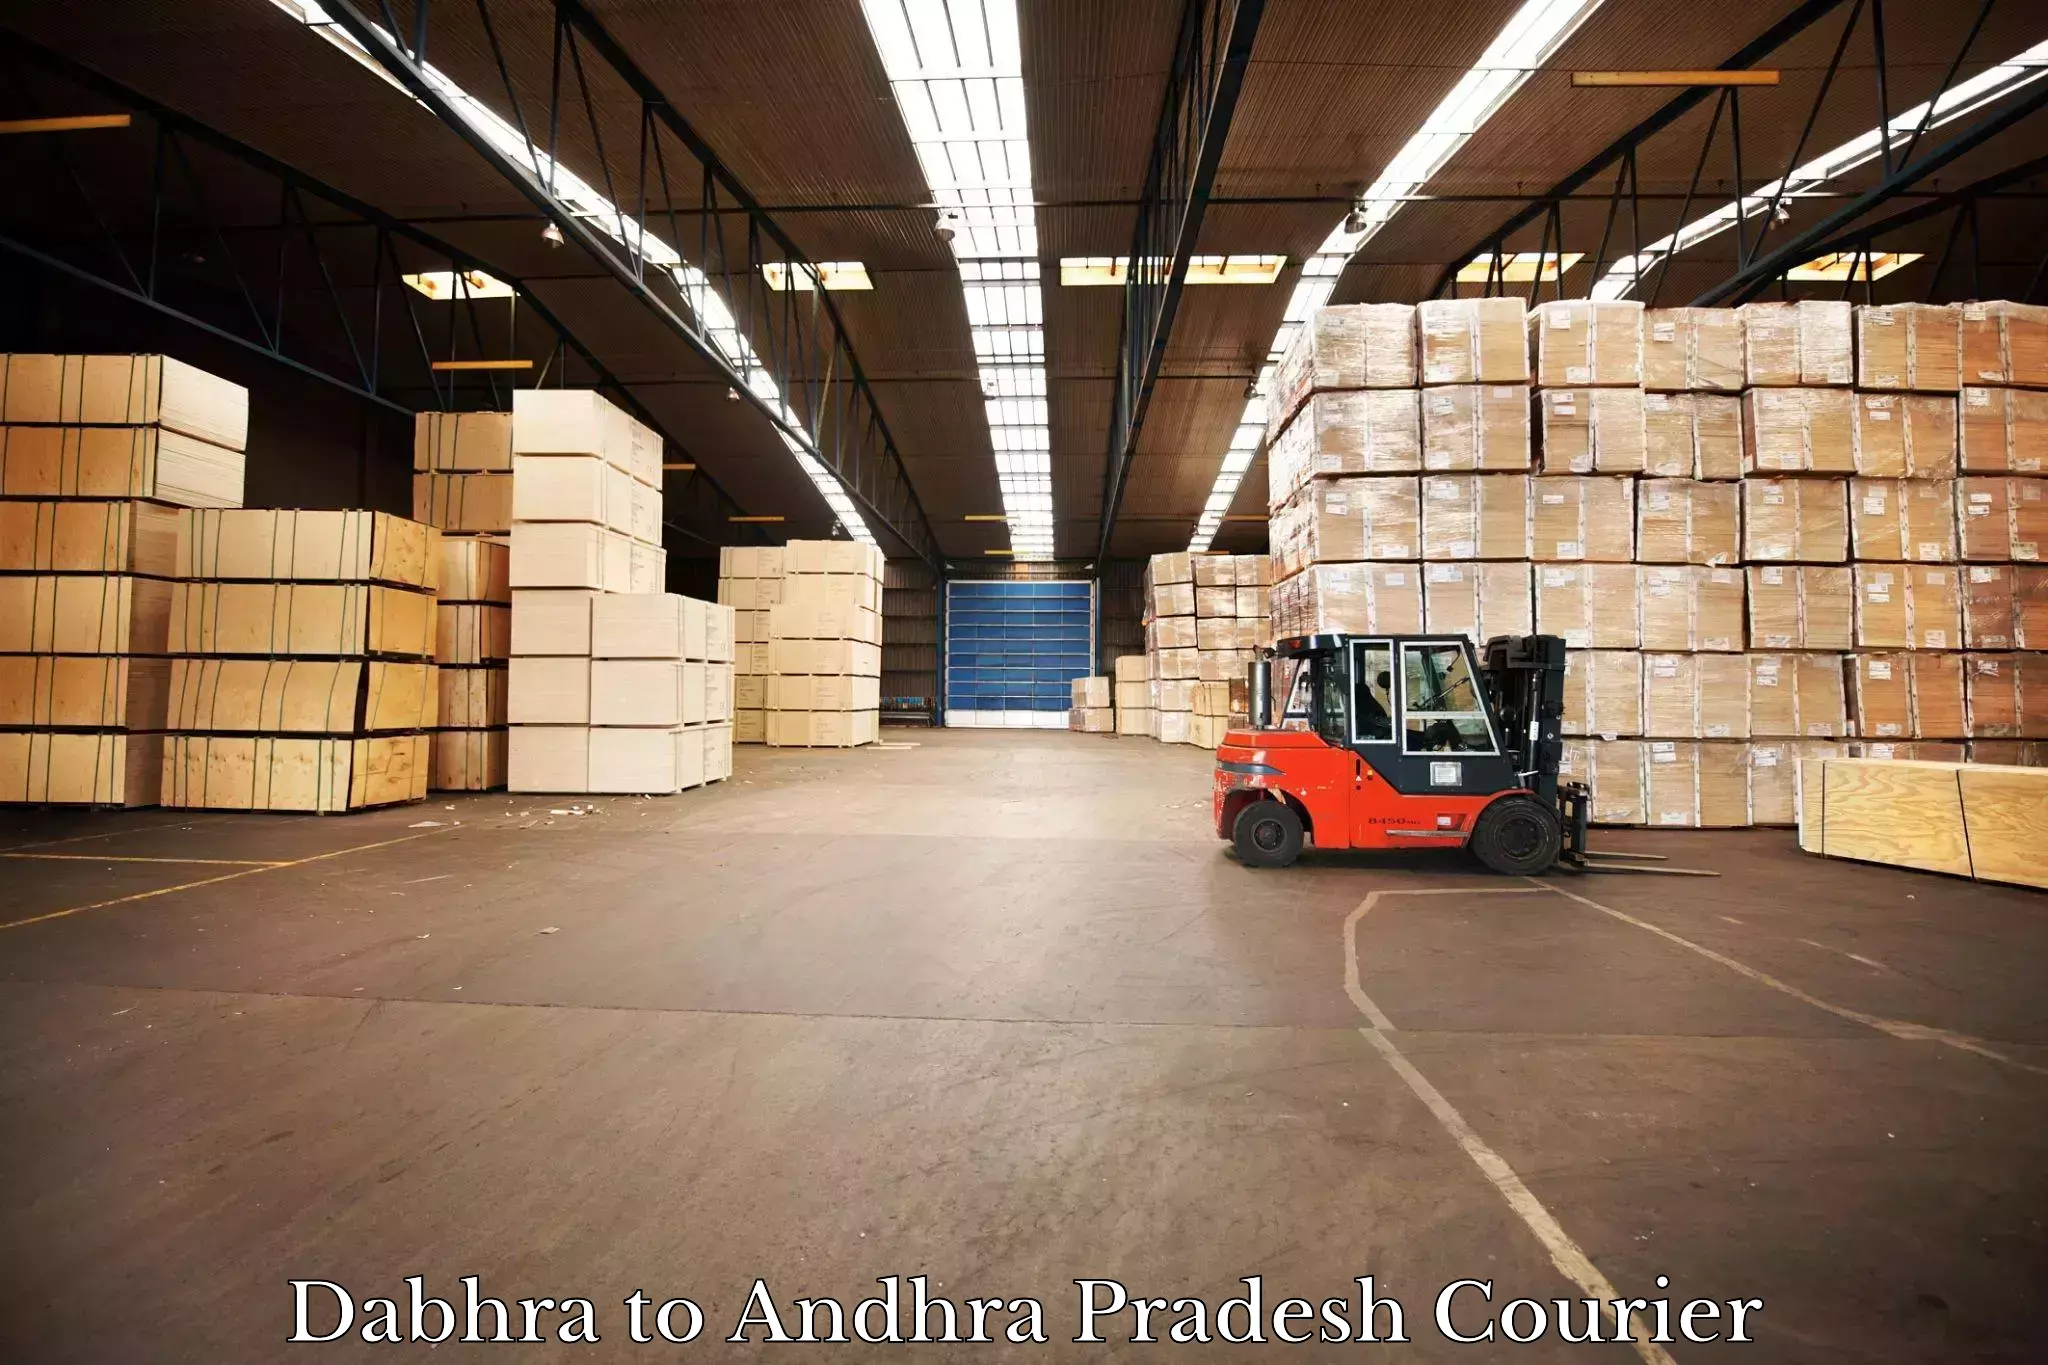 Express delivery capabilities Dabhra to IIT Tirupati